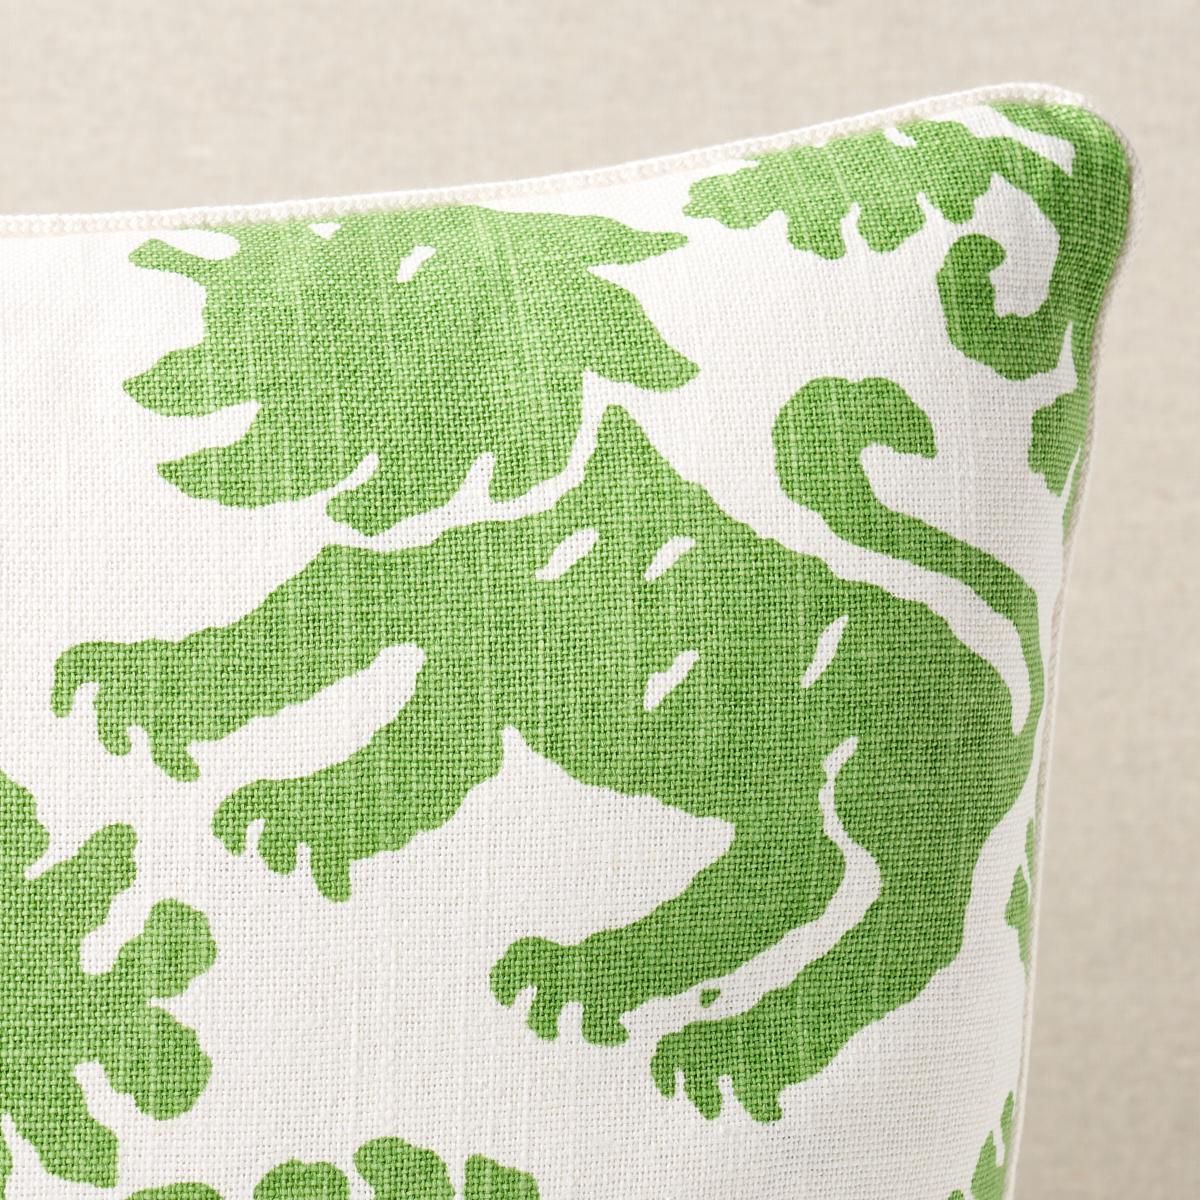 This pillow features Regalia. This artisanal print features mirrored silhouettes of rampant lions and stylized flowers on a textural union cloth ground. Pillow is finished with a welt in Cedric Cotton Lip Cord Narrow. Cord contents: 48% Fibranne,